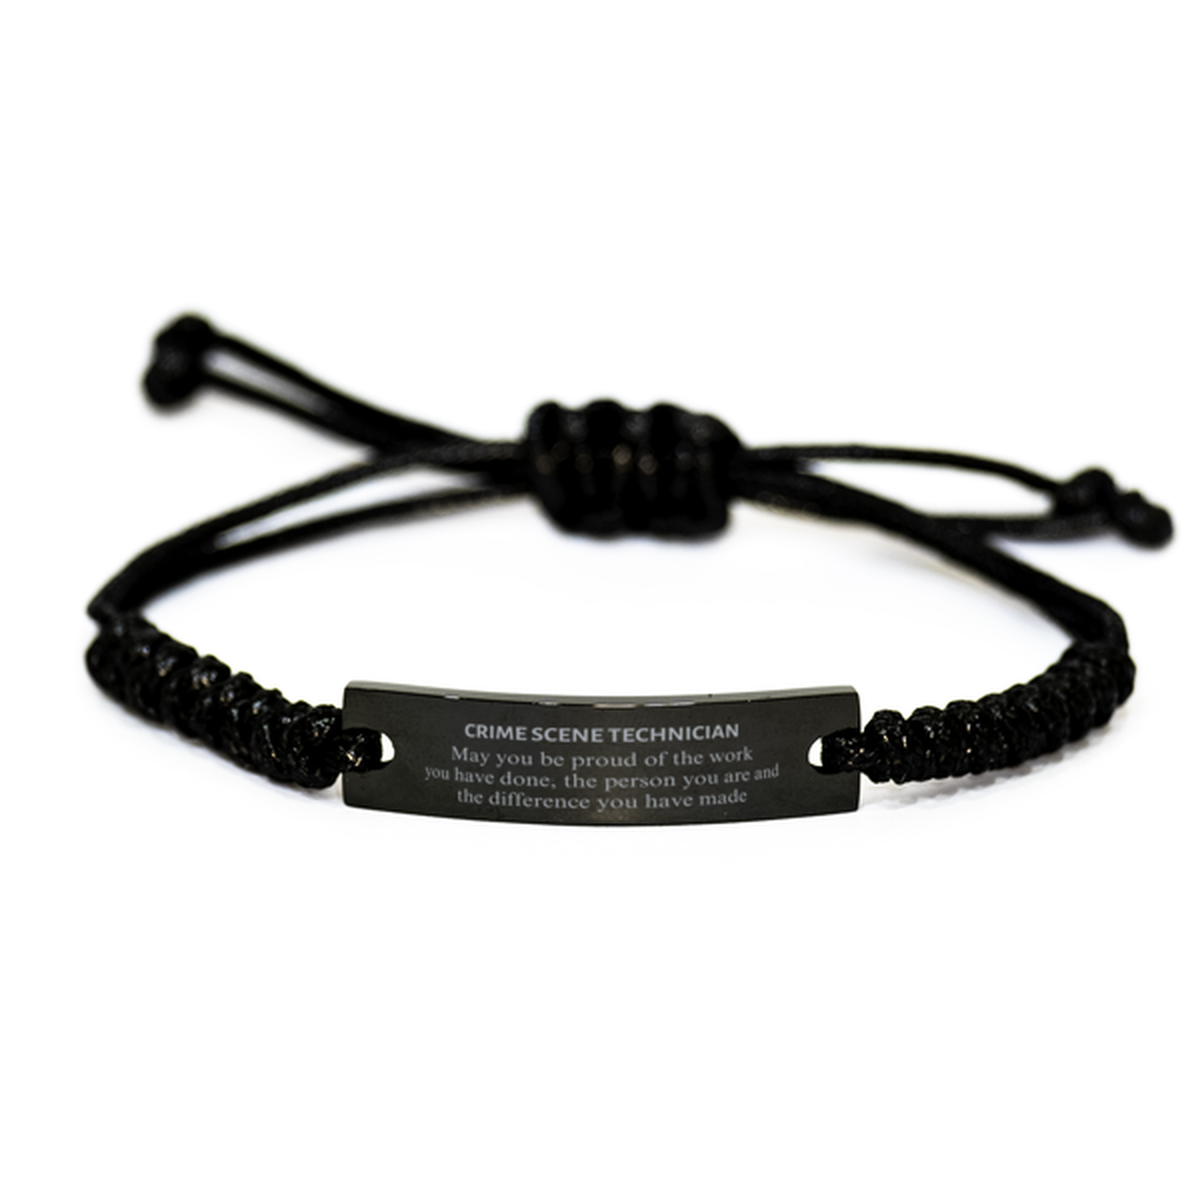 Crime Scene Technician May you be proud of the work you have done, Retirement Crime Scene Technician Black Rope Bracelet for Colleague Appreciation Gifts Amazing for Crime Scene Technician